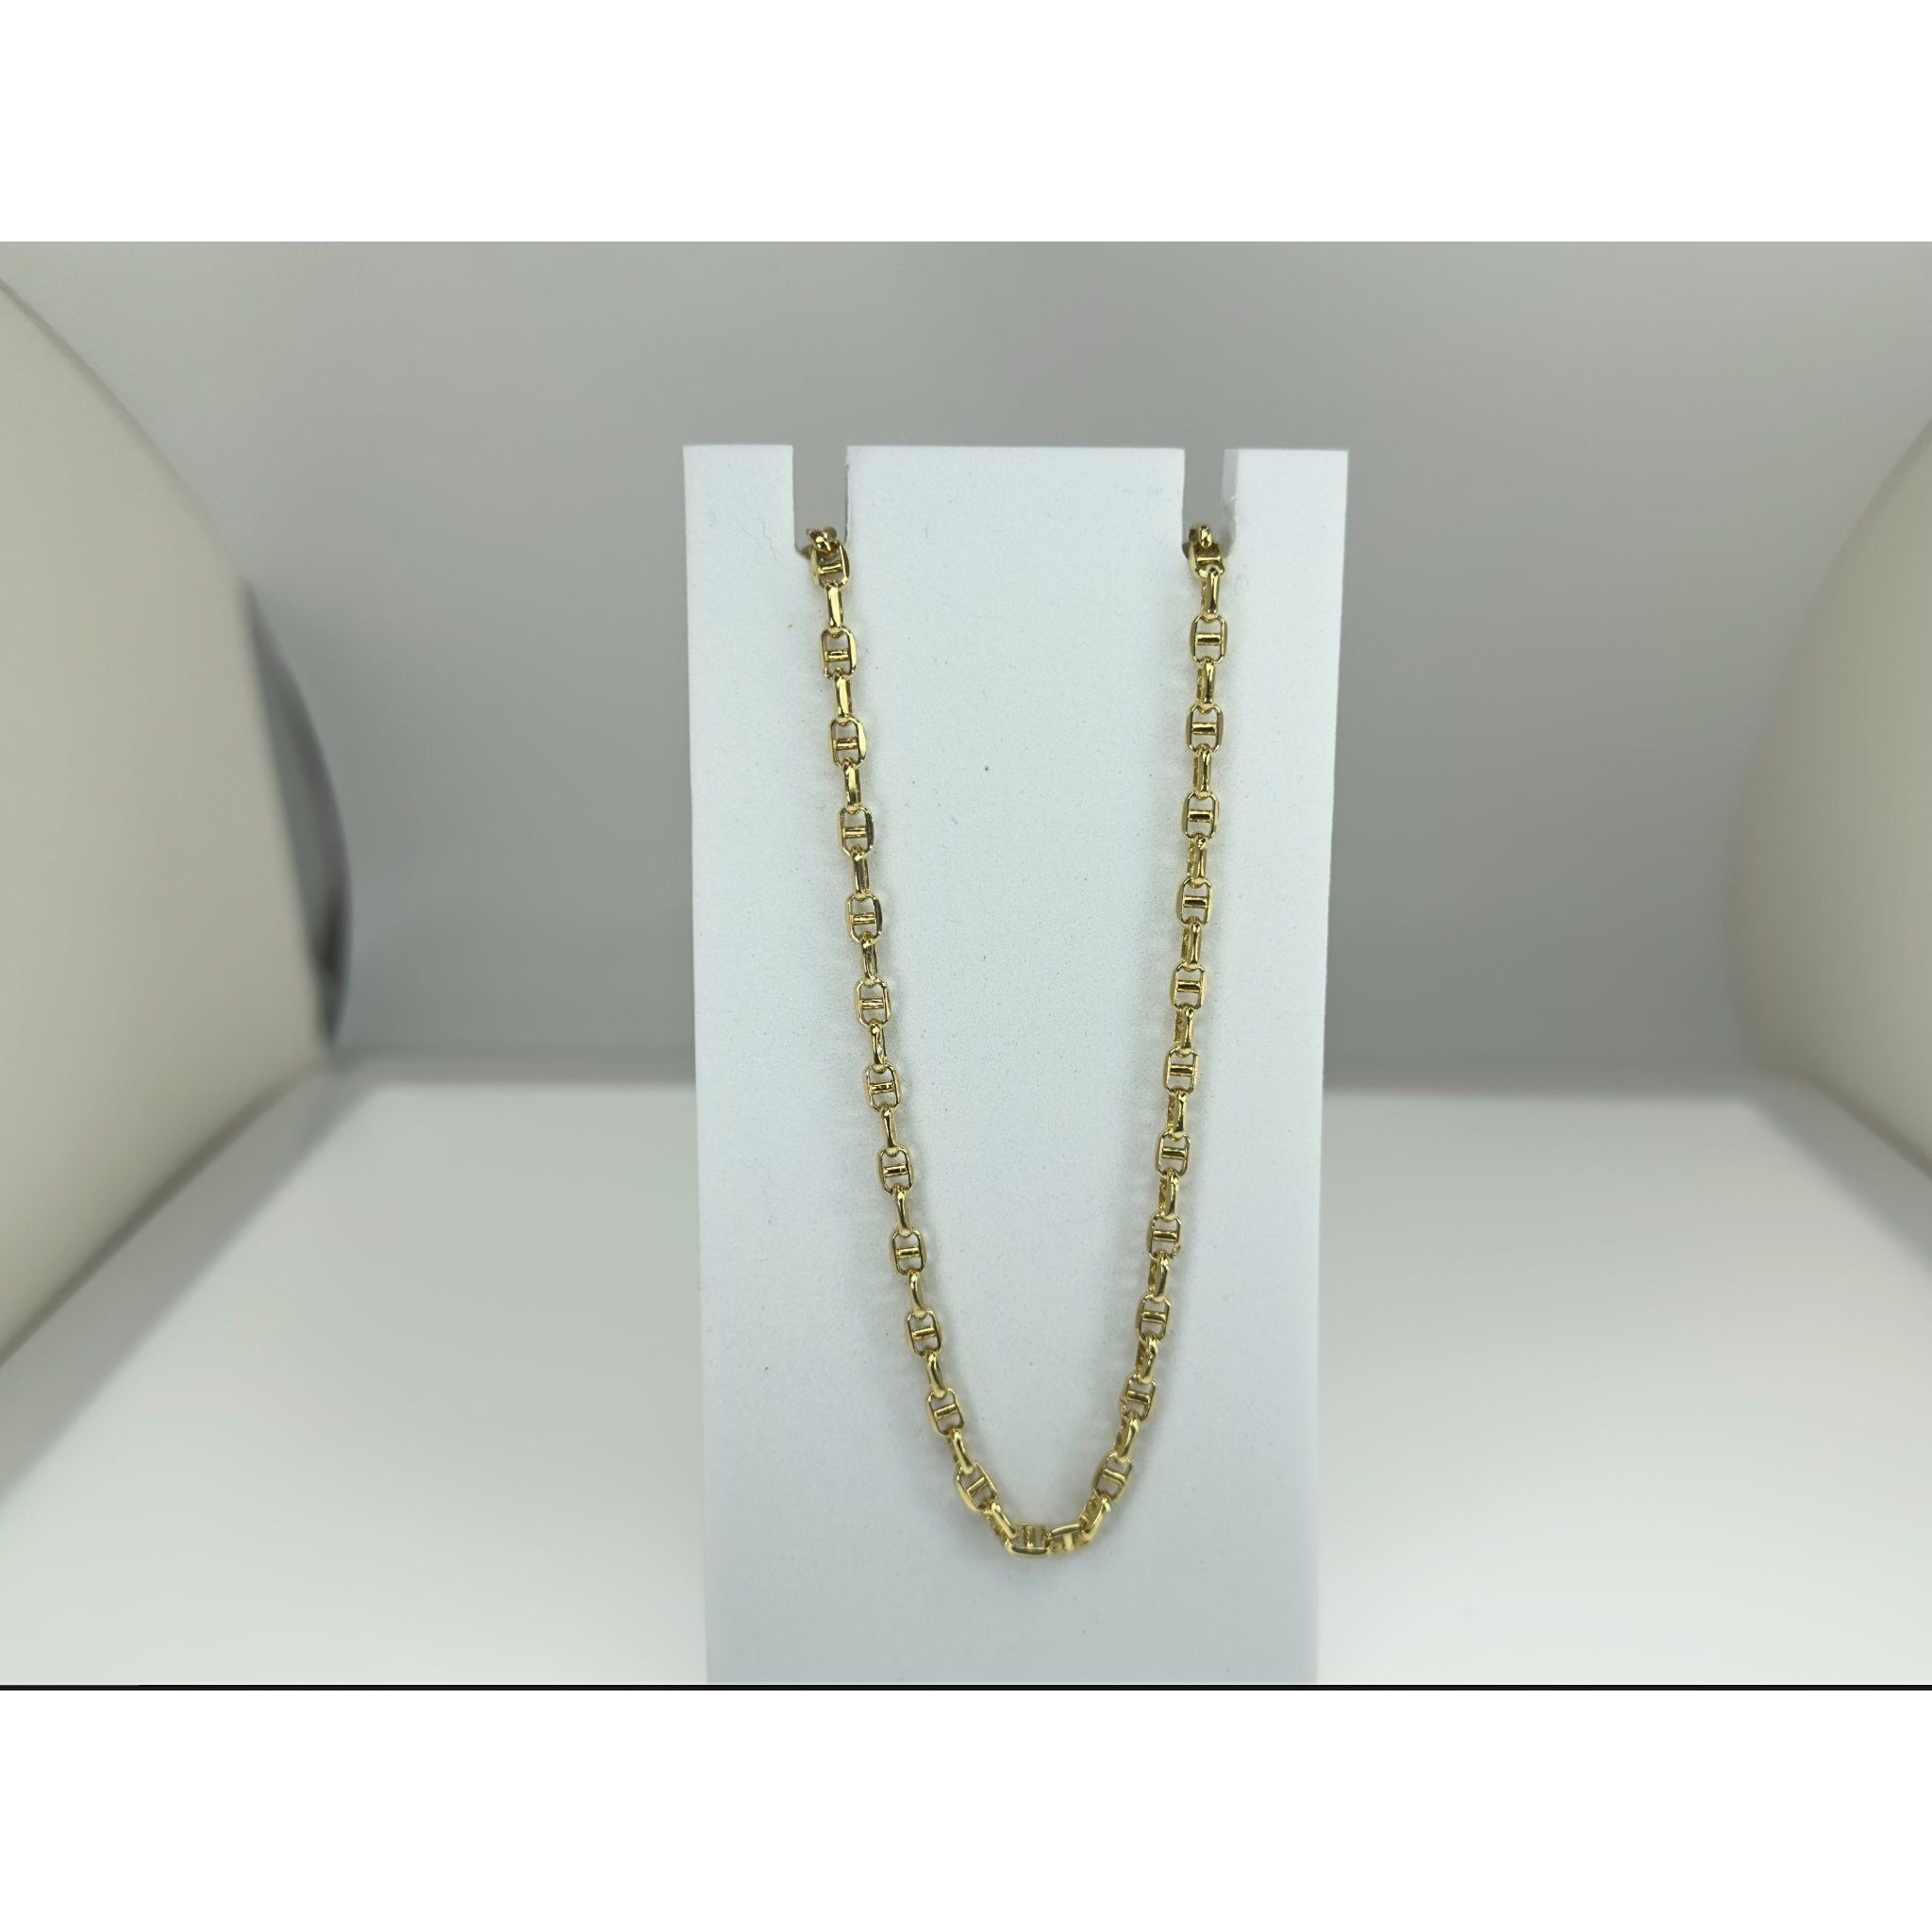 DR1721 - 14K Yellow Gold - Men's Gold Chains